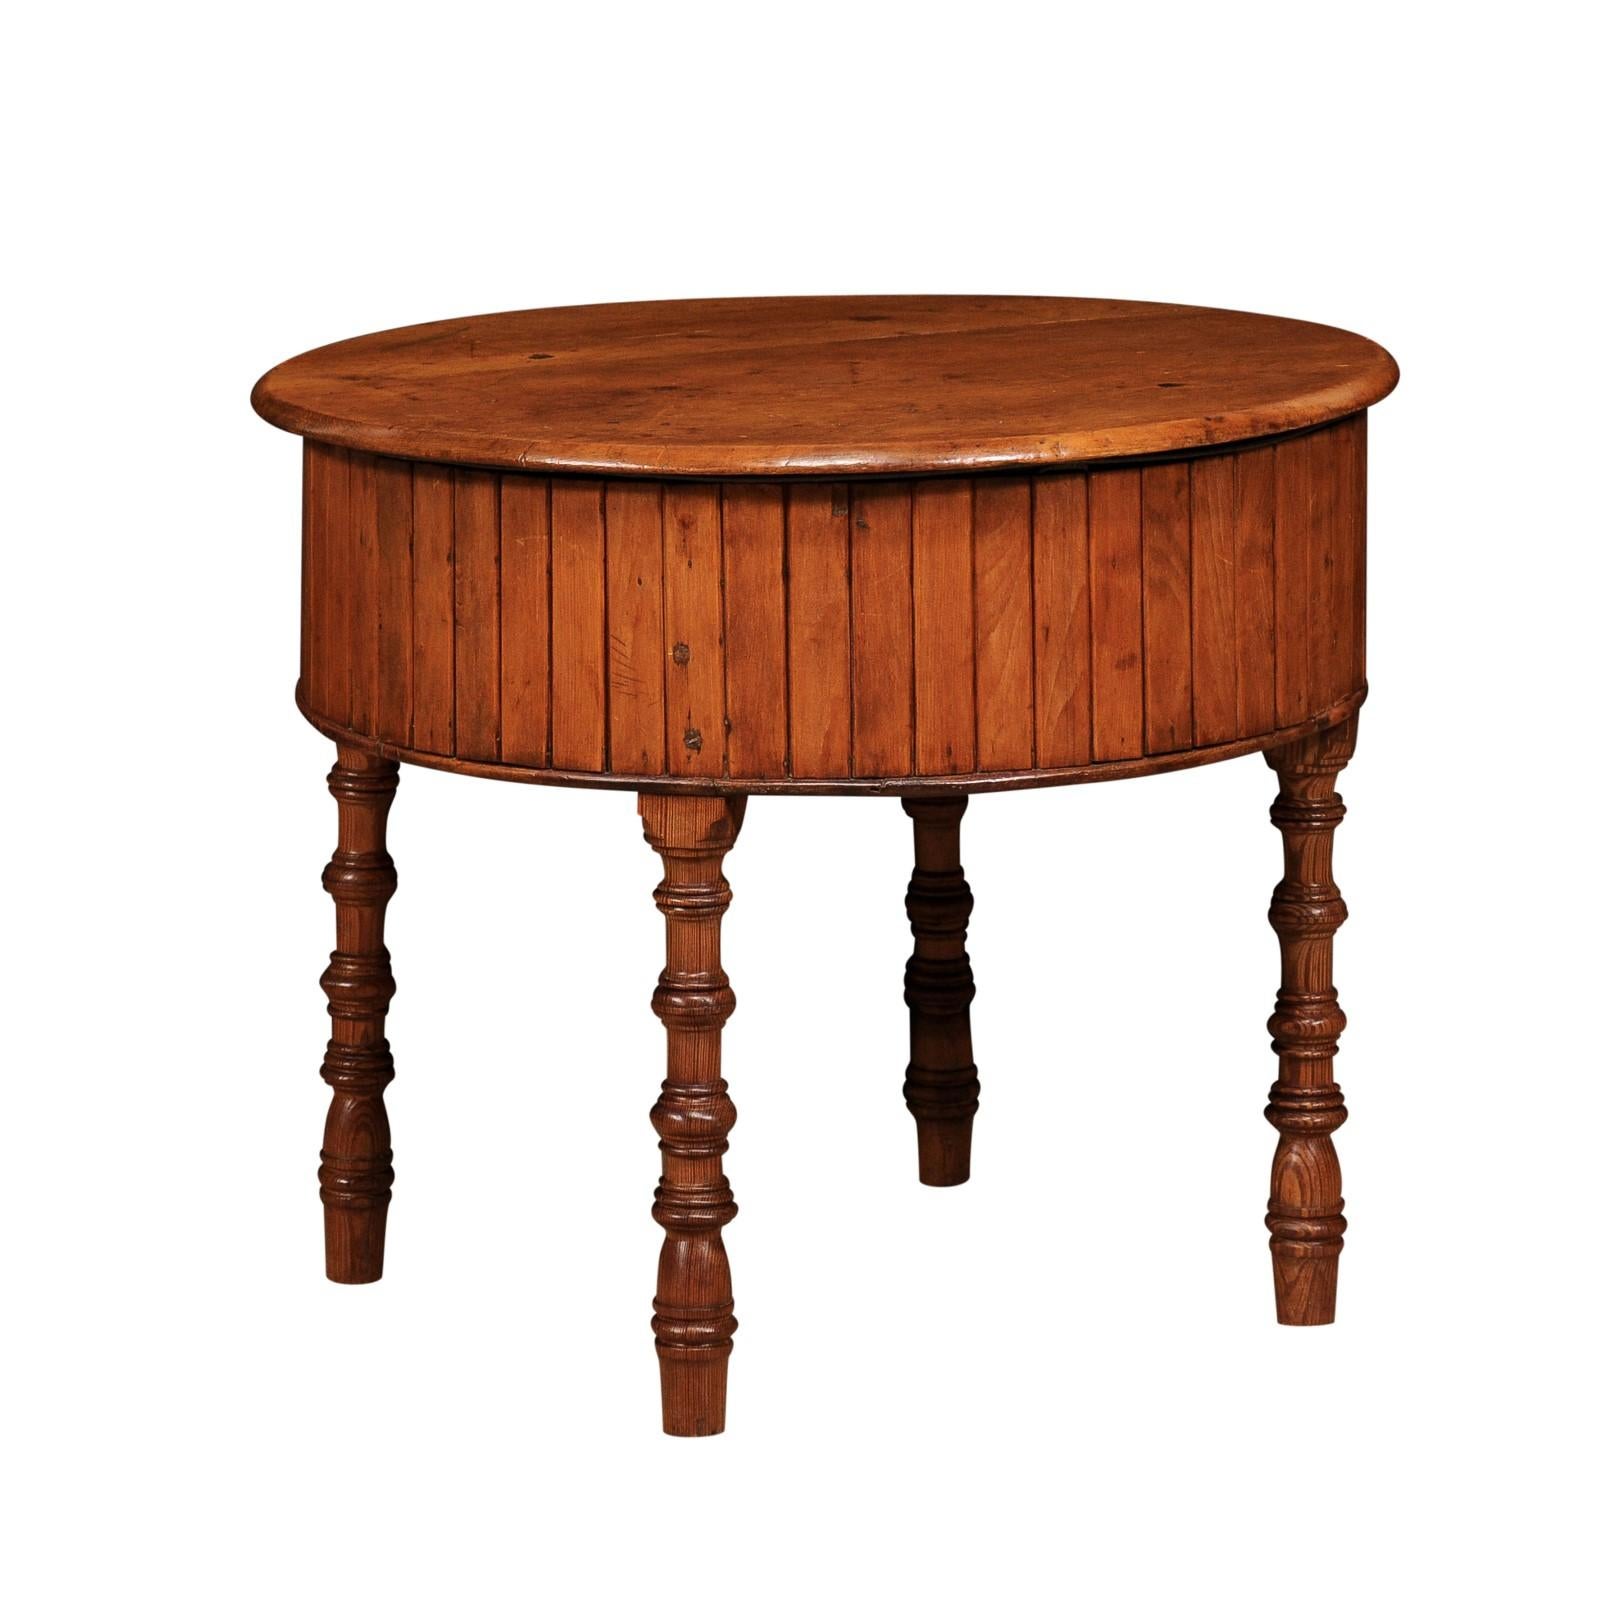 An English pine drum table from the 19th century with removable circular top, metal basin inside and four faux bamboo legs. This 19th-century English pine drum table is a delightful blend of functionality and rustic charm. Its removable circular top